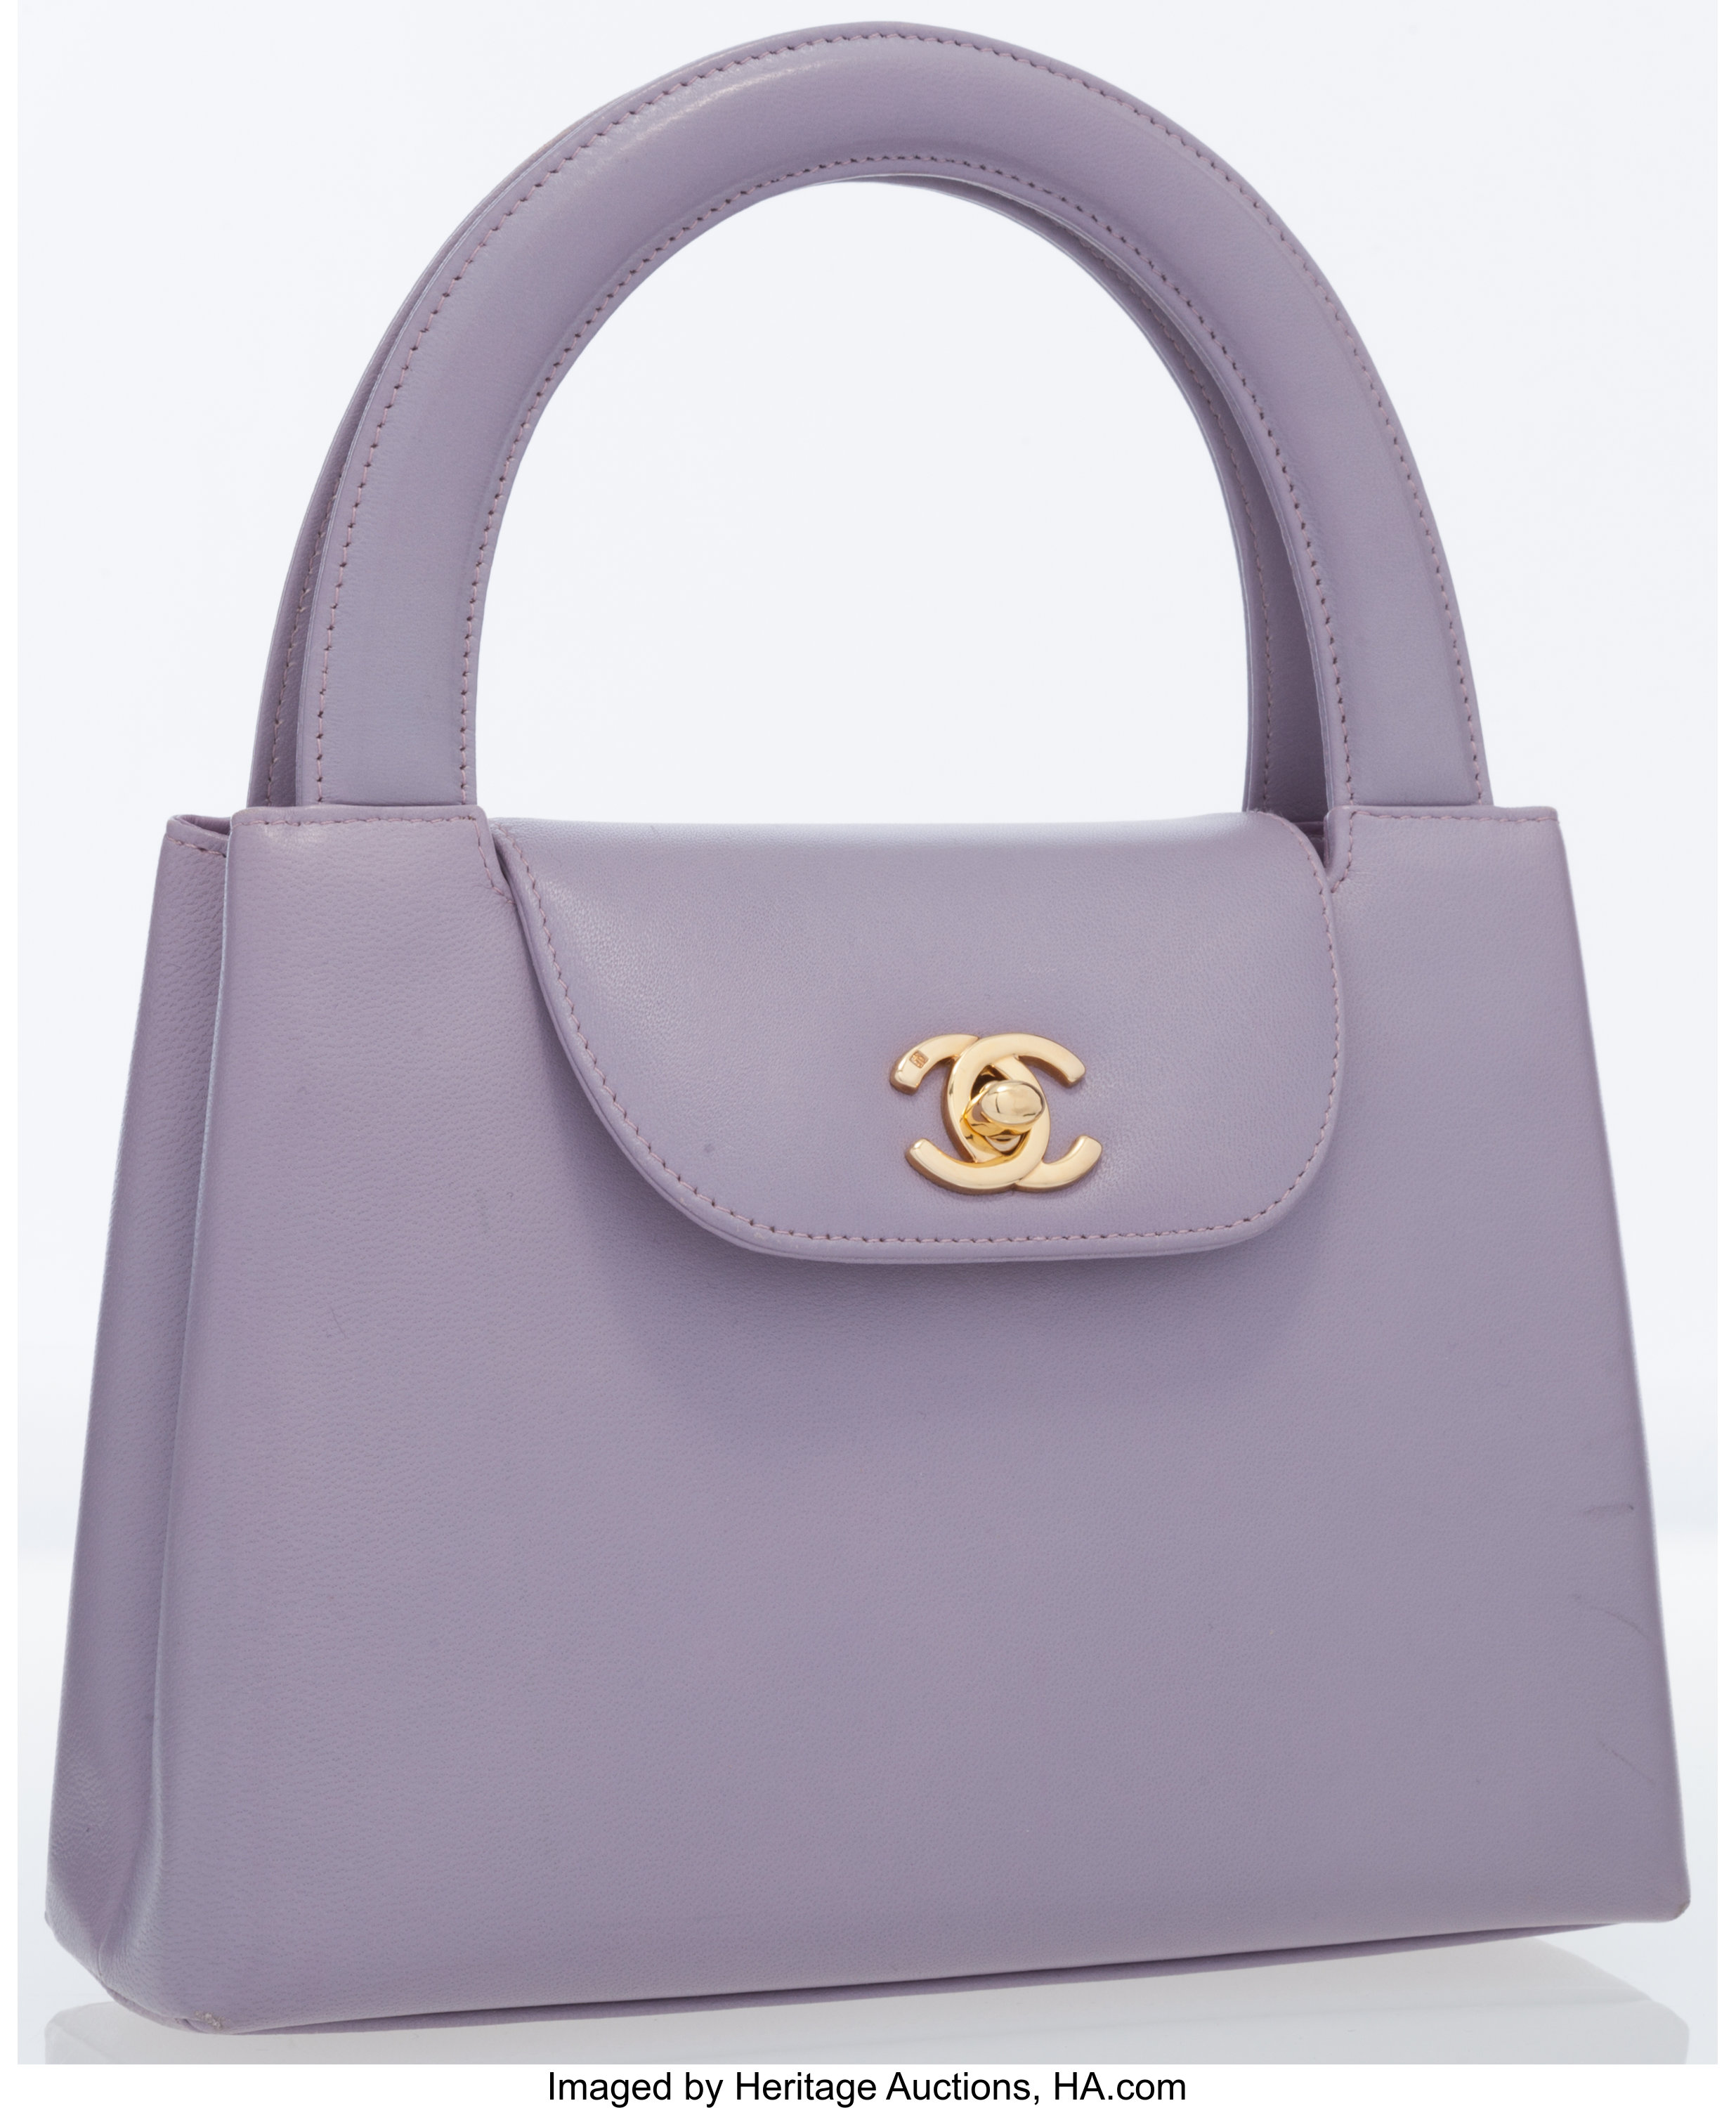 Chanel Lilac Lambskin Leather Small Tote Bag with Gold Hardware